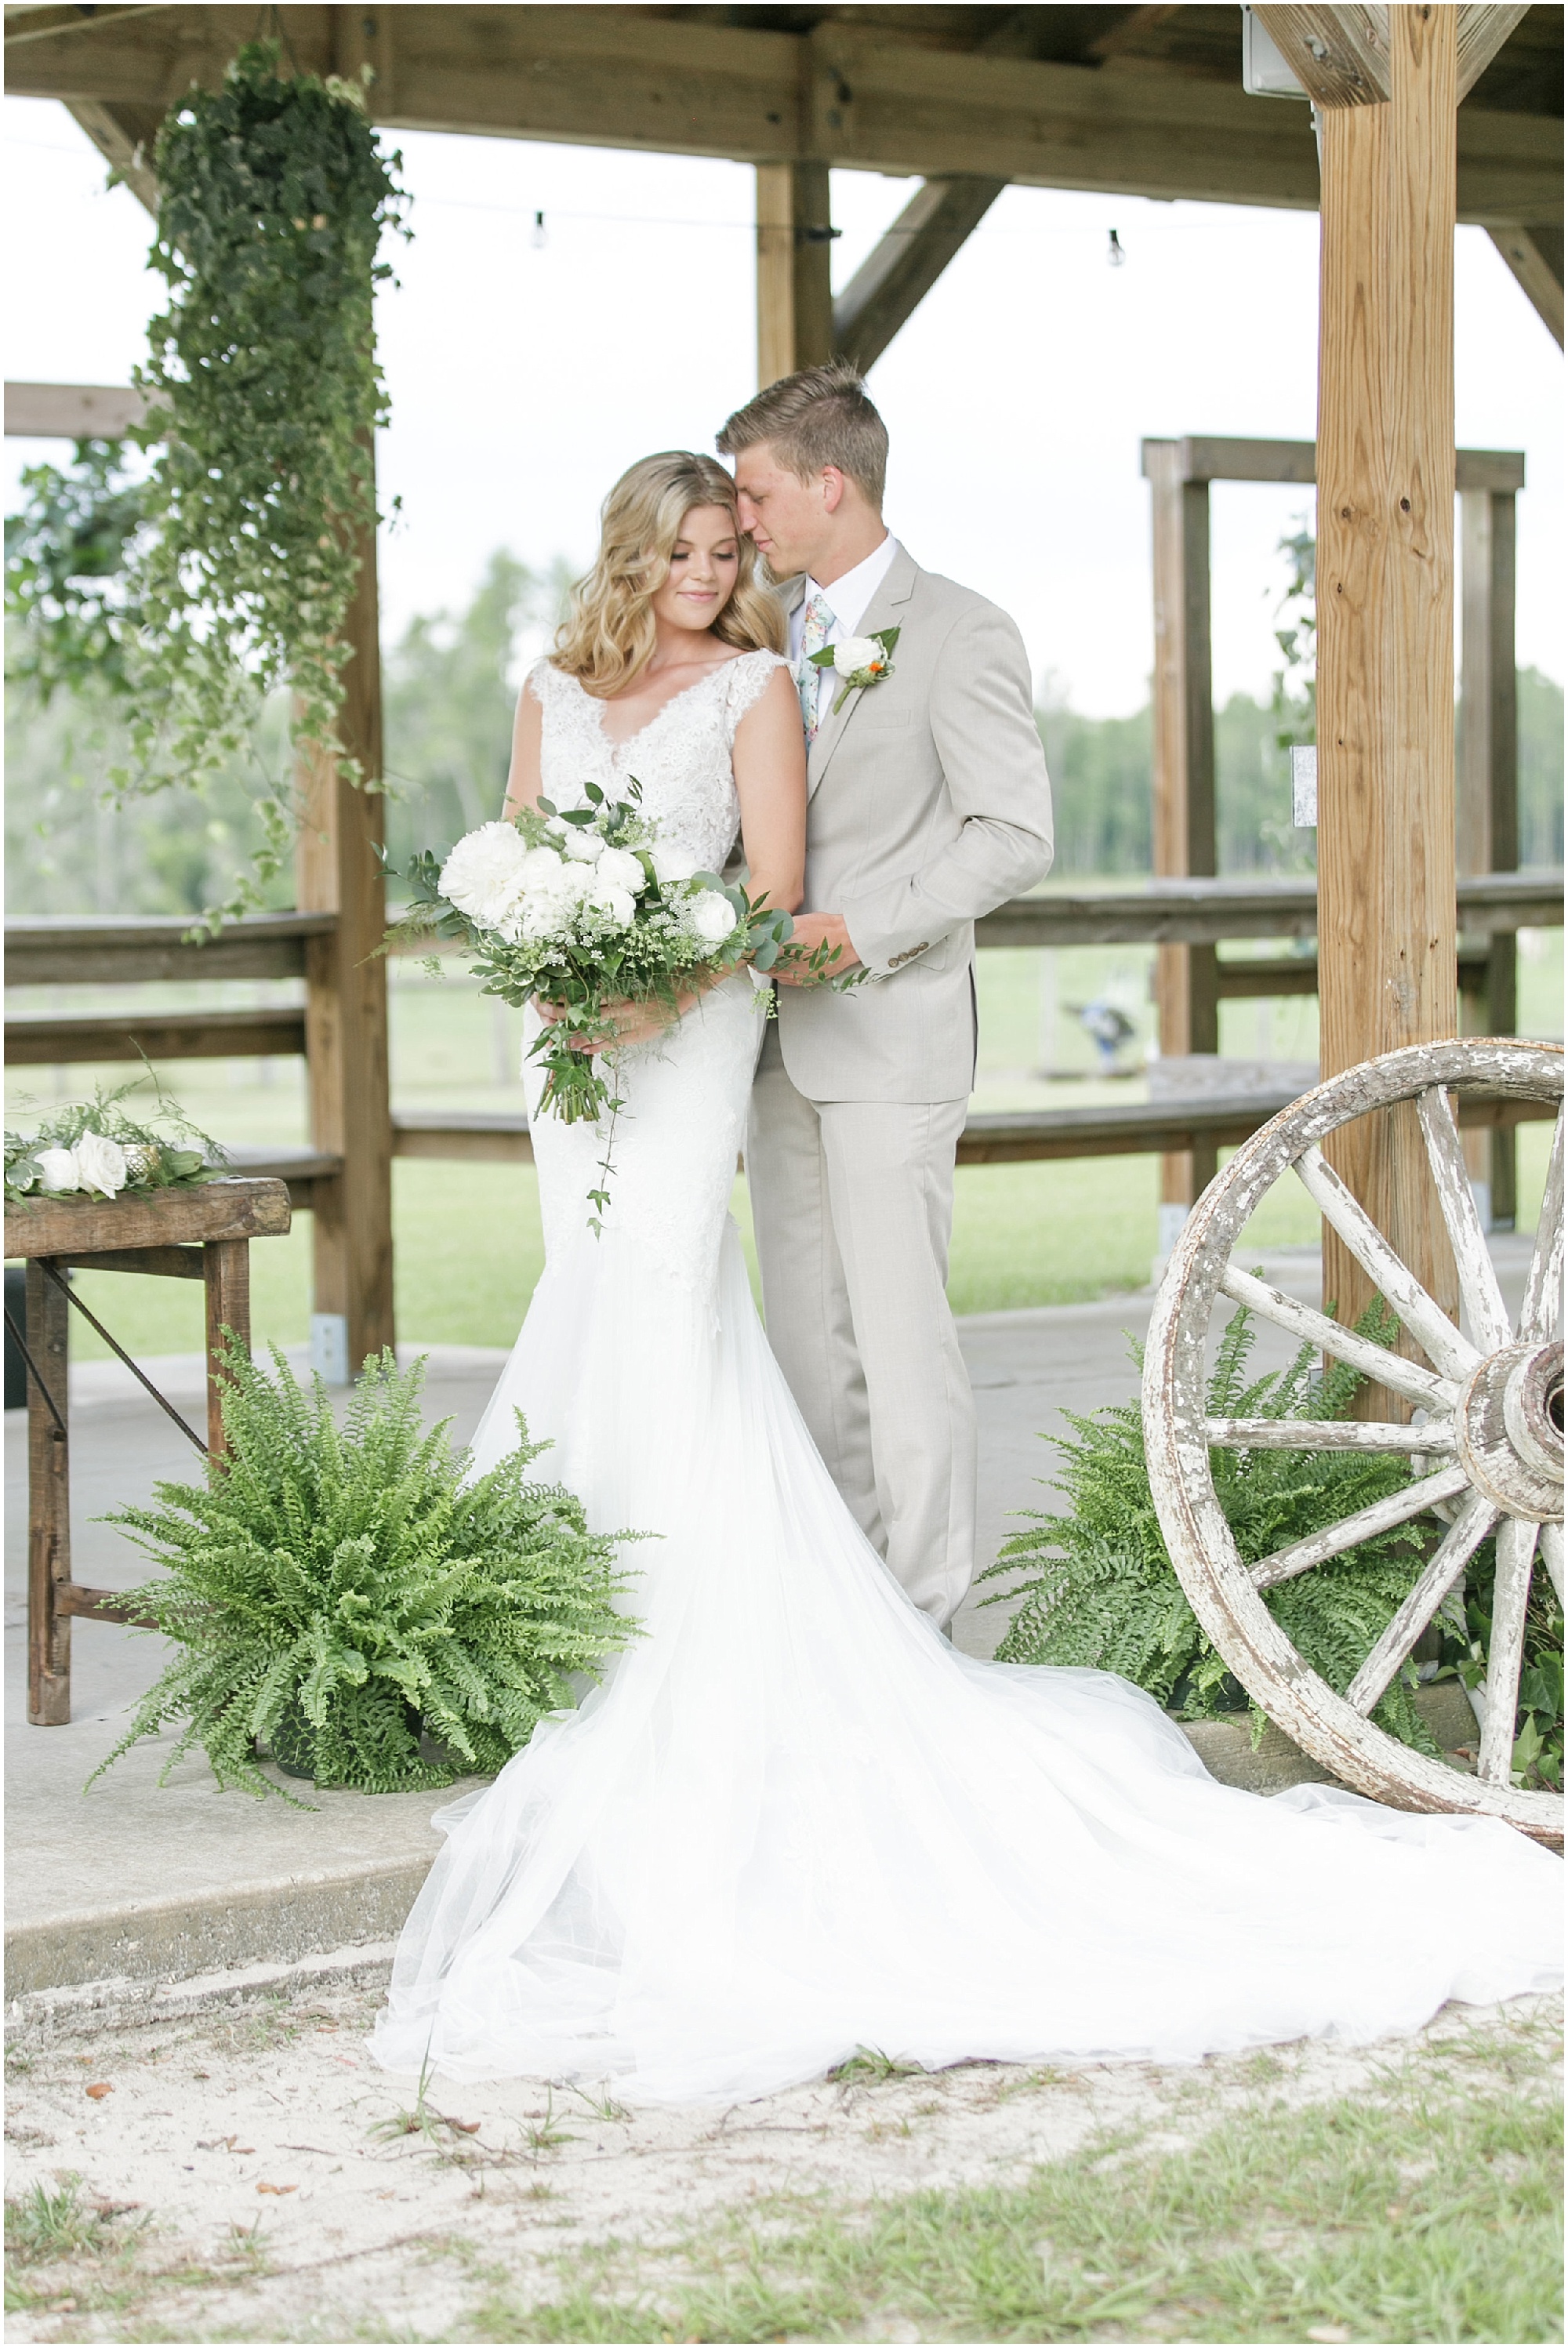 Bride and groom at their Florida Southern Charm Wedding at Sunny Acres Lodge.